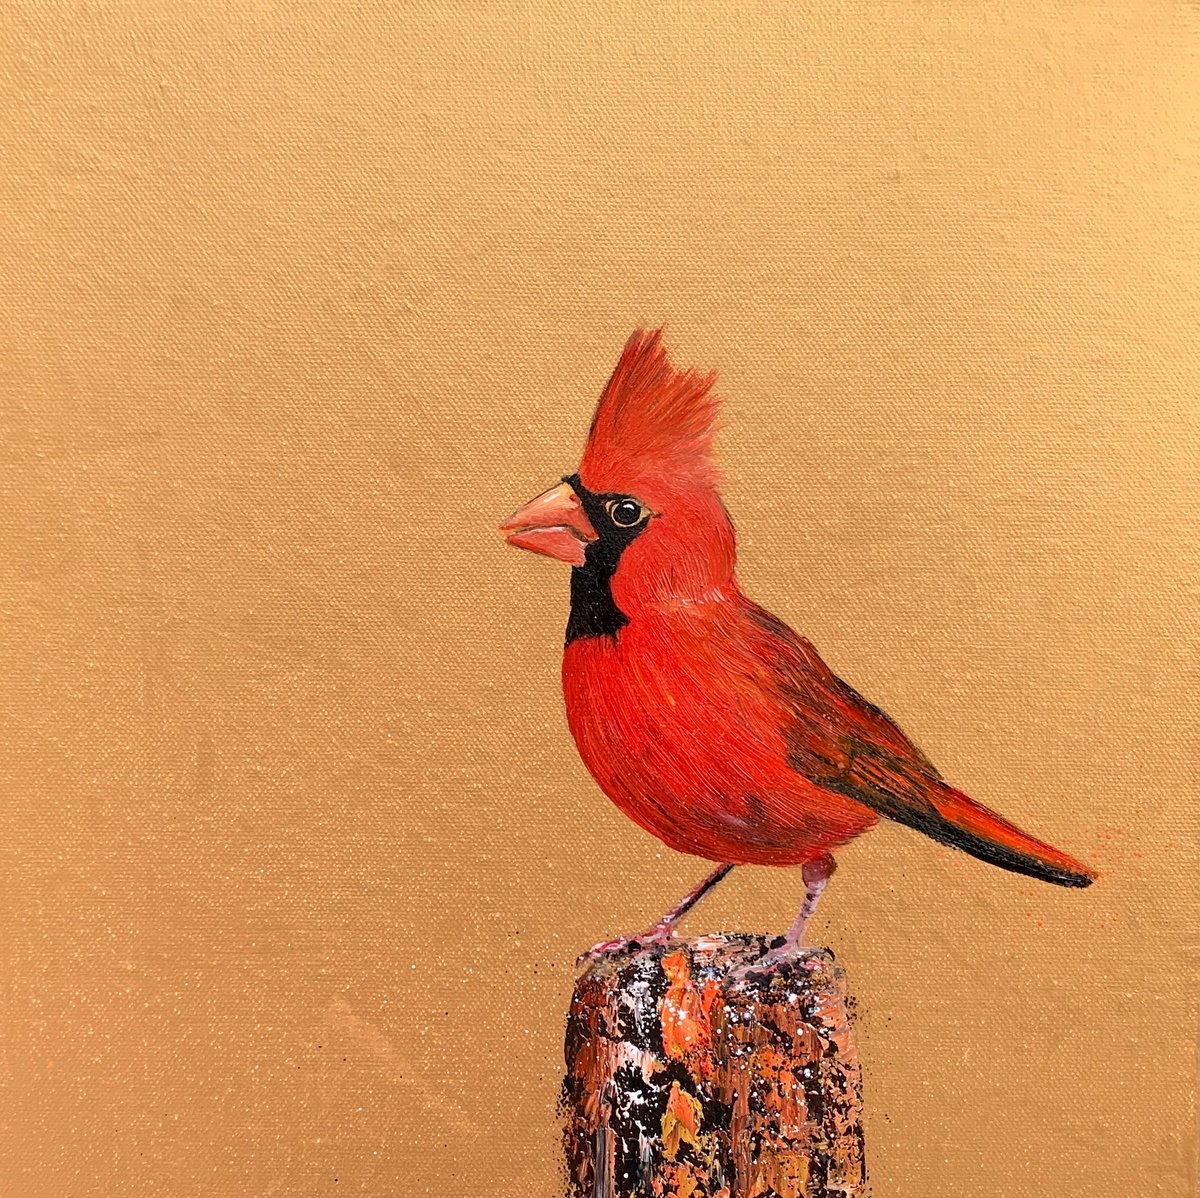 The Red Cardinal by Laure Bury